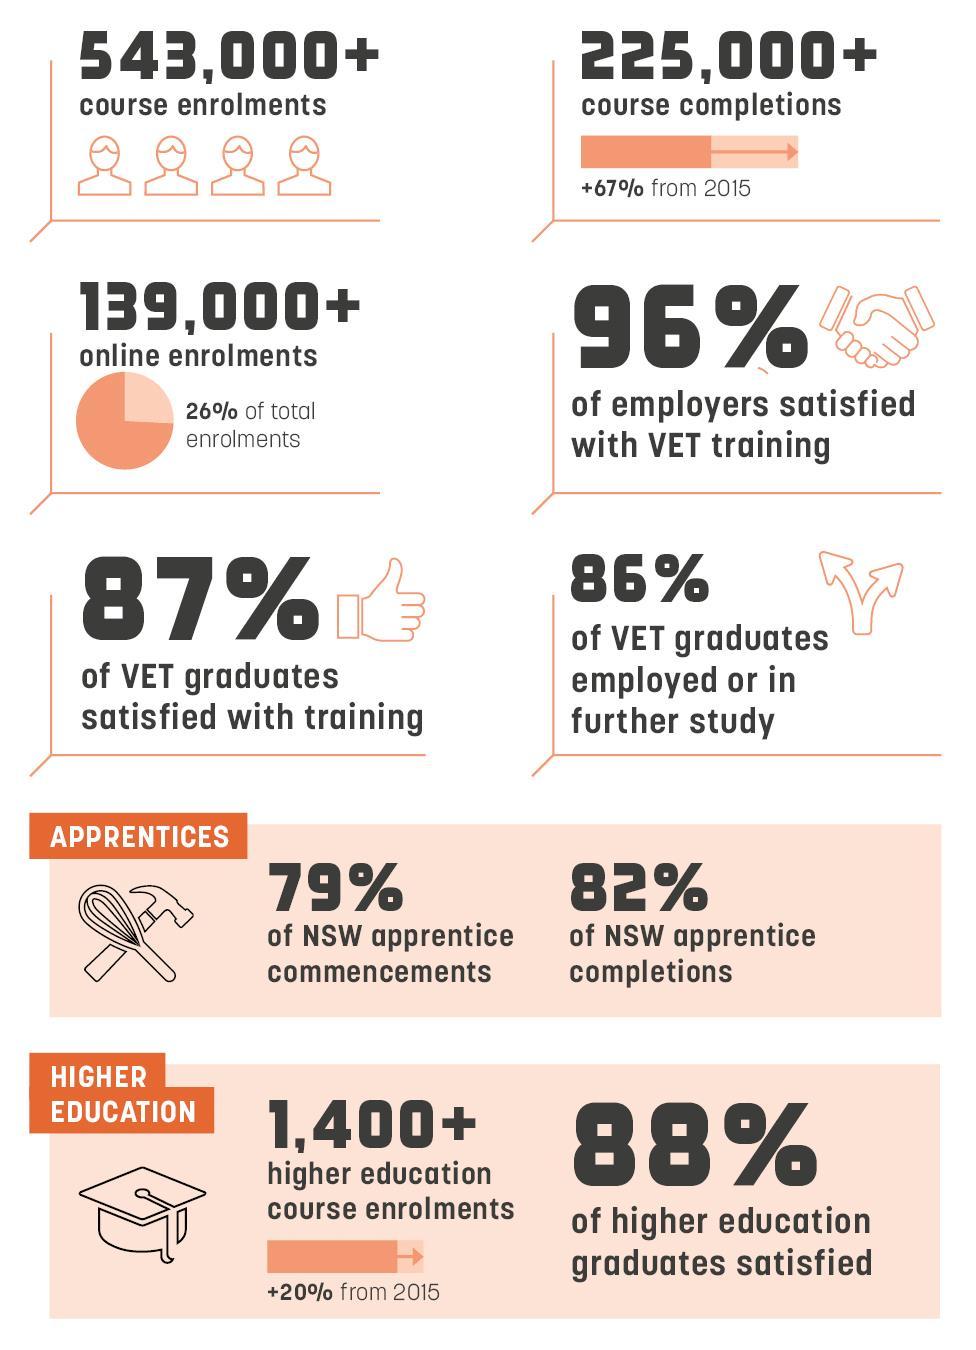 TAFE NSW AT A GLANCE IN 2016 4 Sources: TAFE NSW corporate and higher education, Training Services NSW, National Centre for Vocational Education Research data